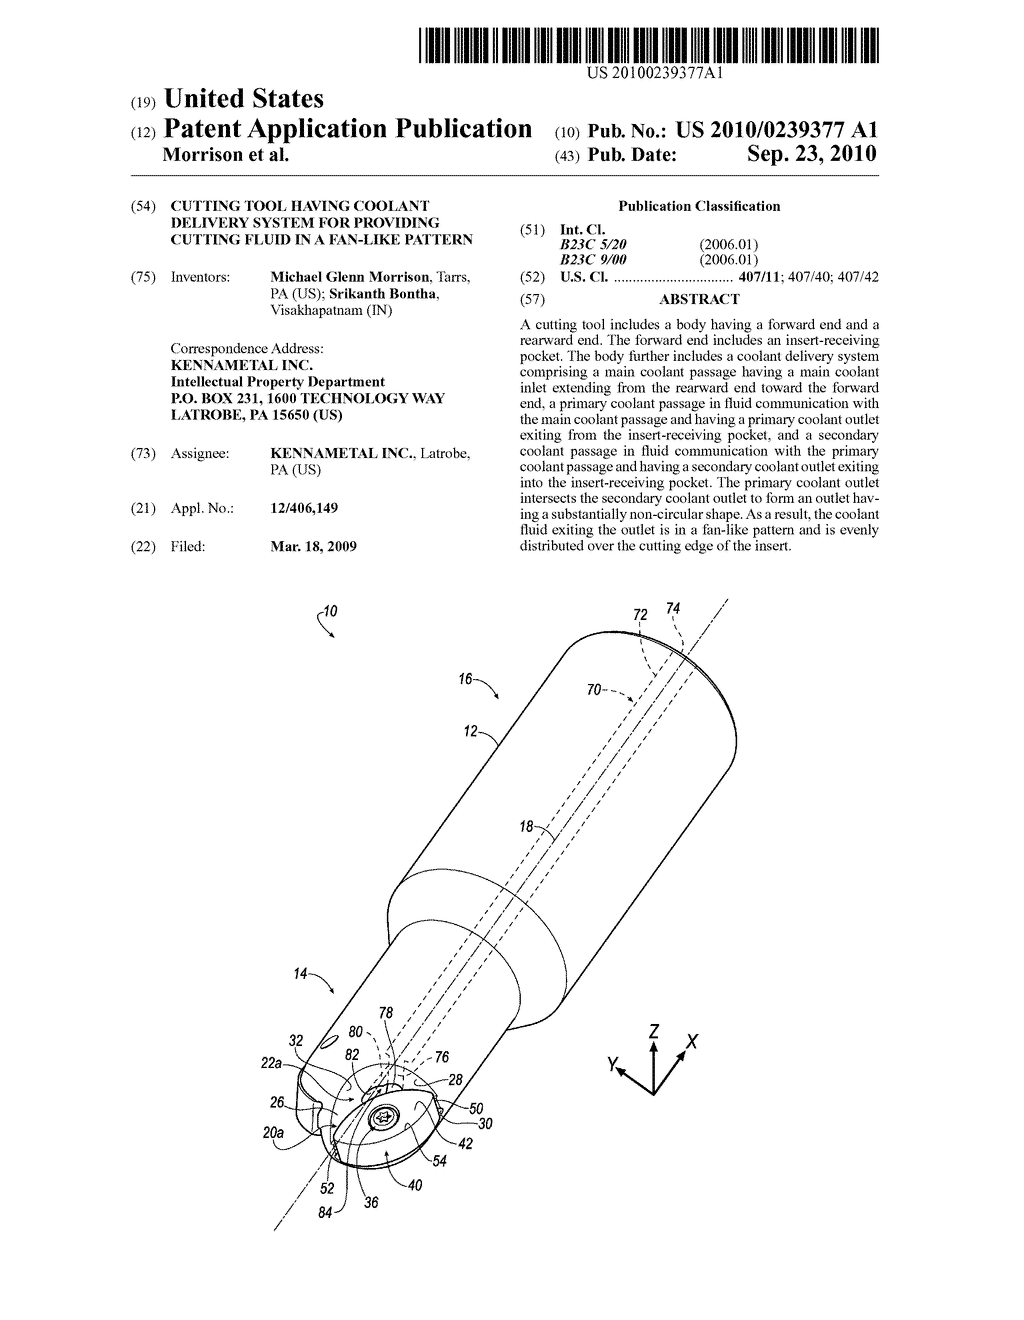 CUTTING TOOL HAVING COOLANT DELIVERY SYSTEM FOR PROVIDING CUTTING FLUID IN A FAN-LIKE PATTERN - diagram, schematic, and image 01